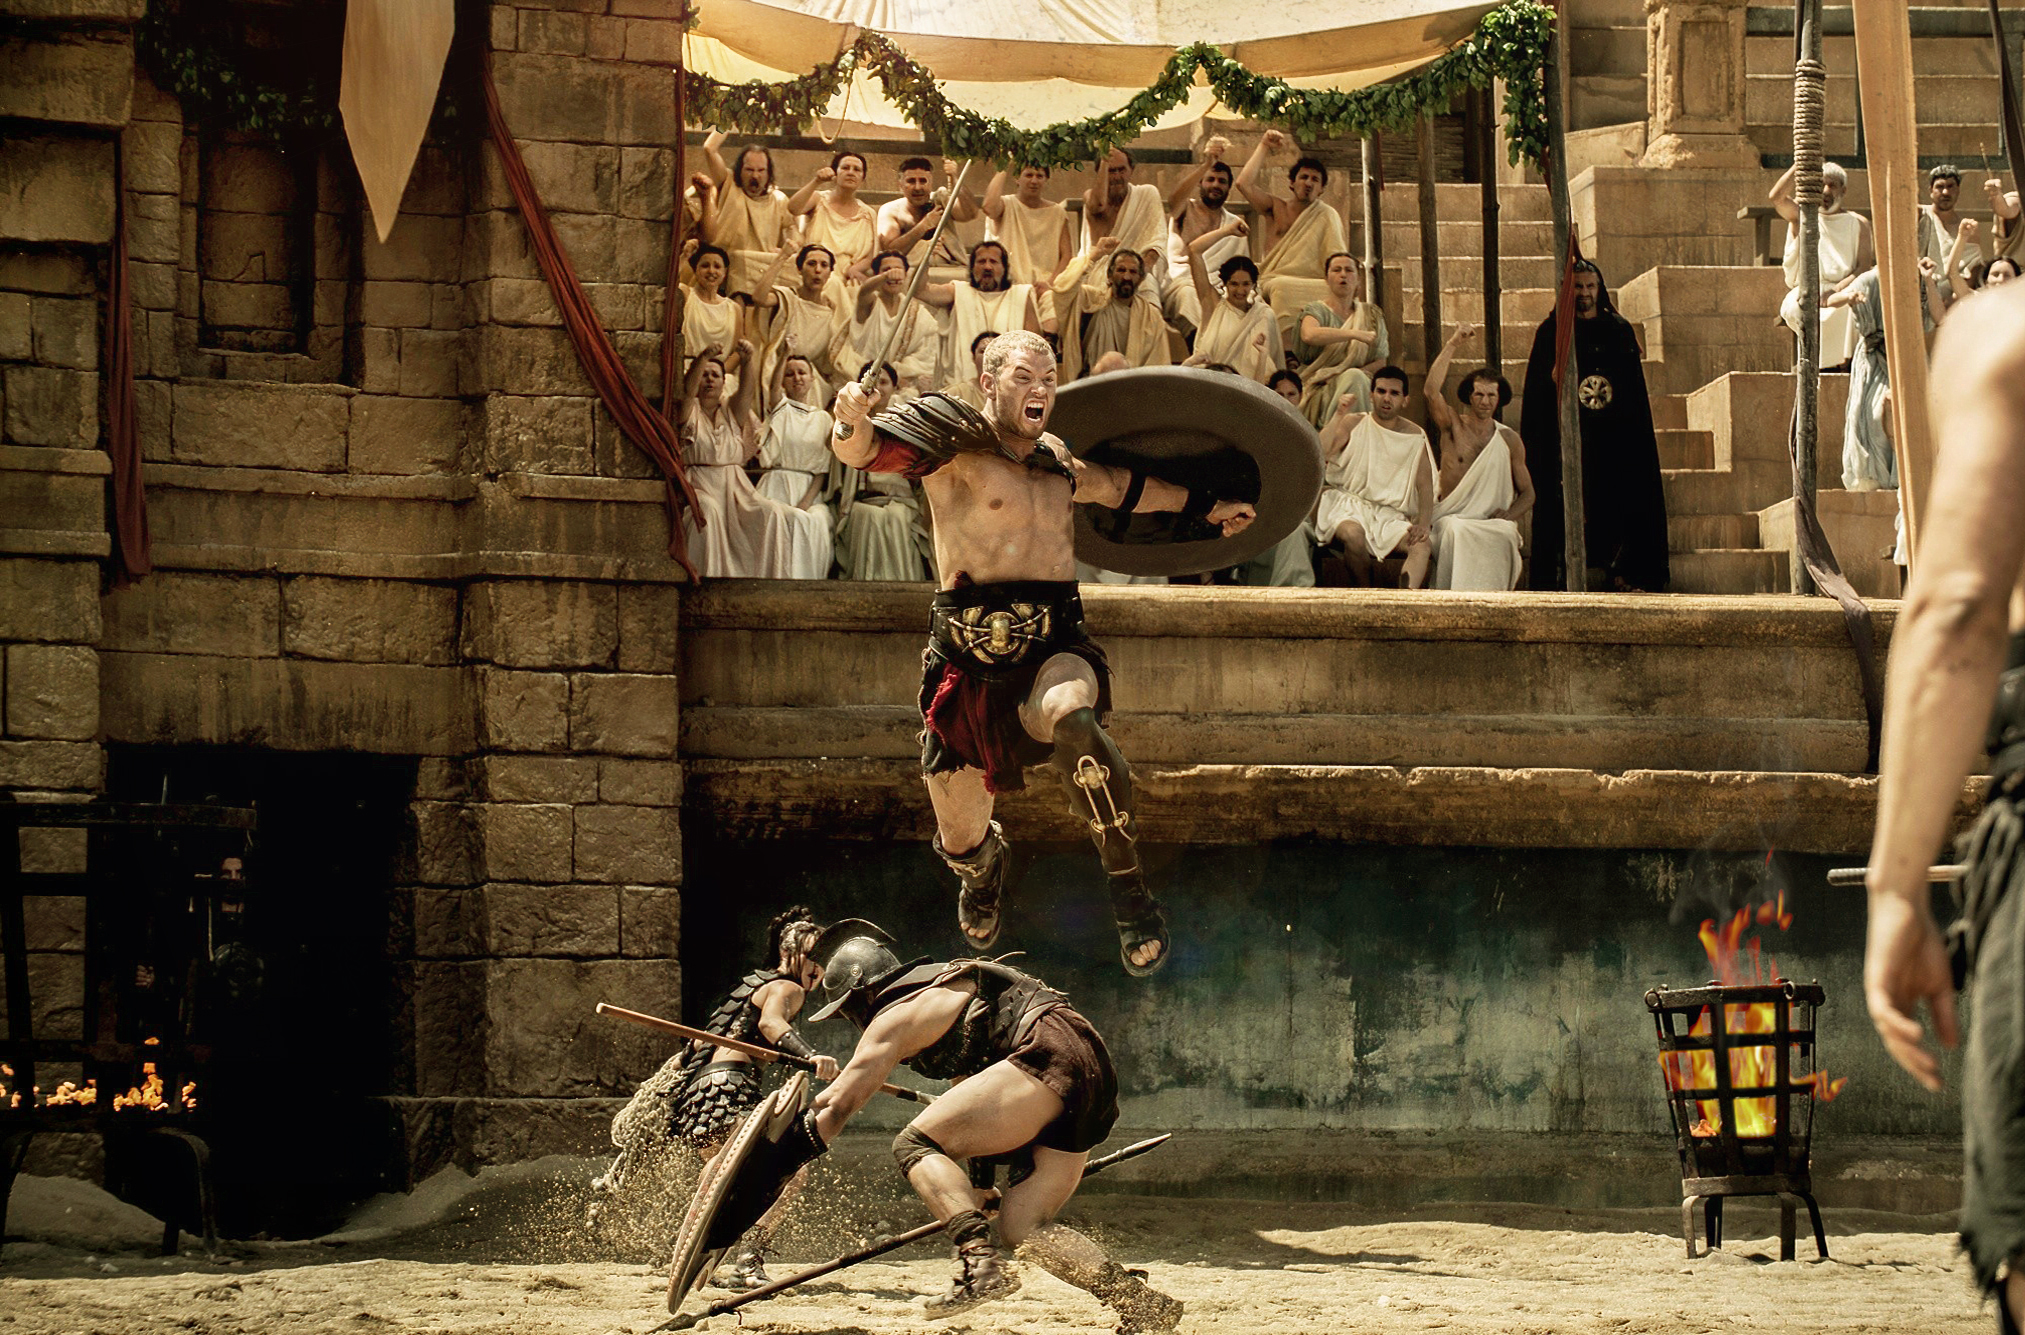 THE LEGEND OF HERCULES - Directed by Renny Harlin - Production Design by Luca Tranchino - Ext. Arena - ©2014 - Millennium Films